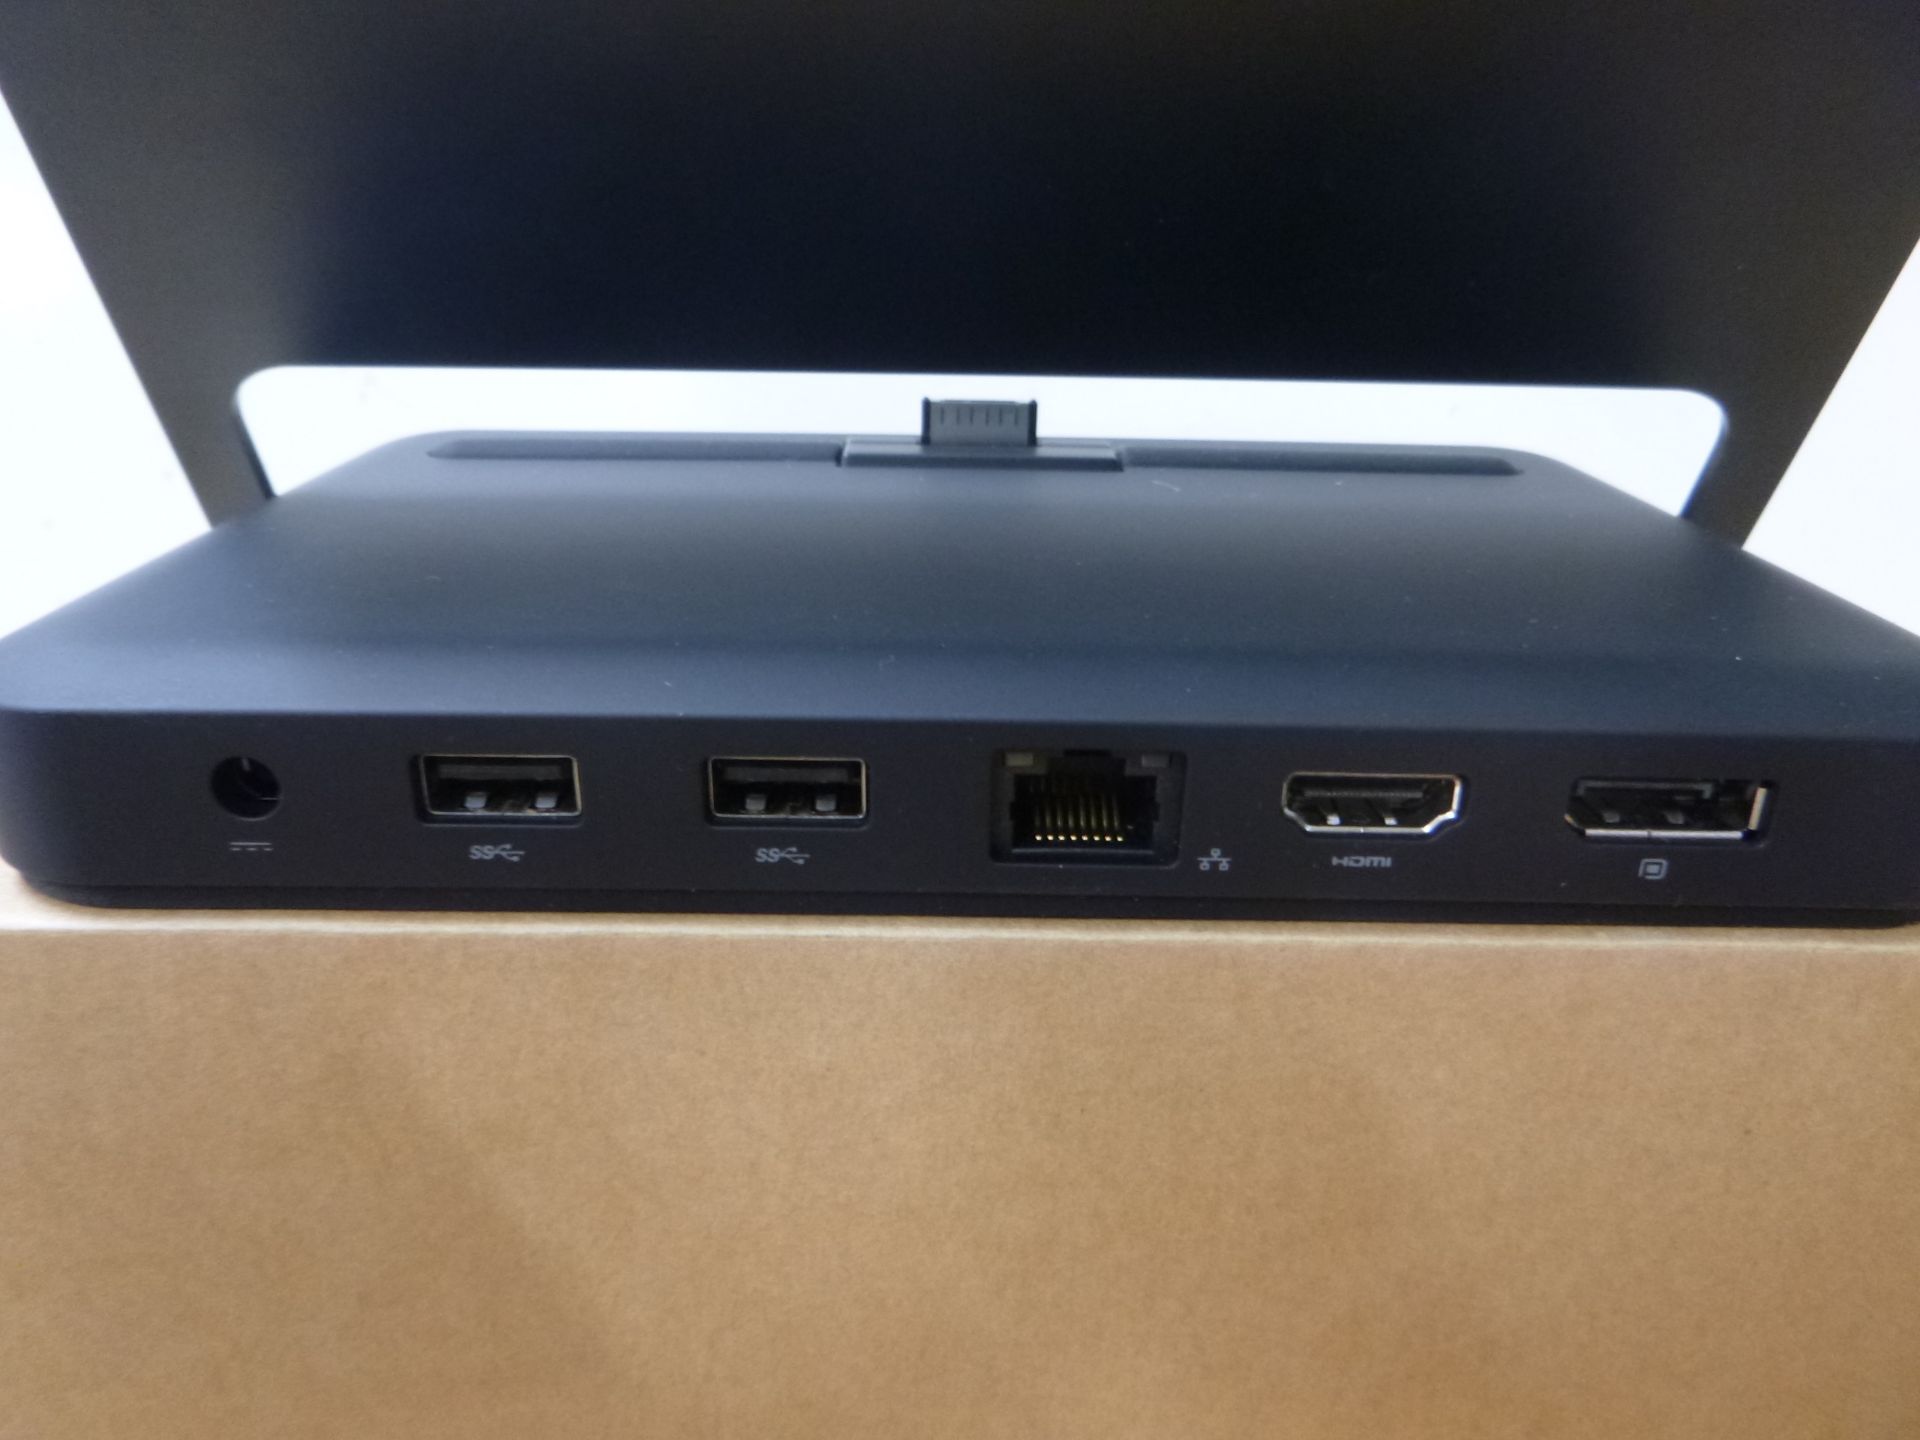 BOXED UNUSED Dell Venue 11 Pro Tablet Docking Station 5130 / 7130 / 7139 / 7140 / 7350. WITH PSU. - Image 2 of 3